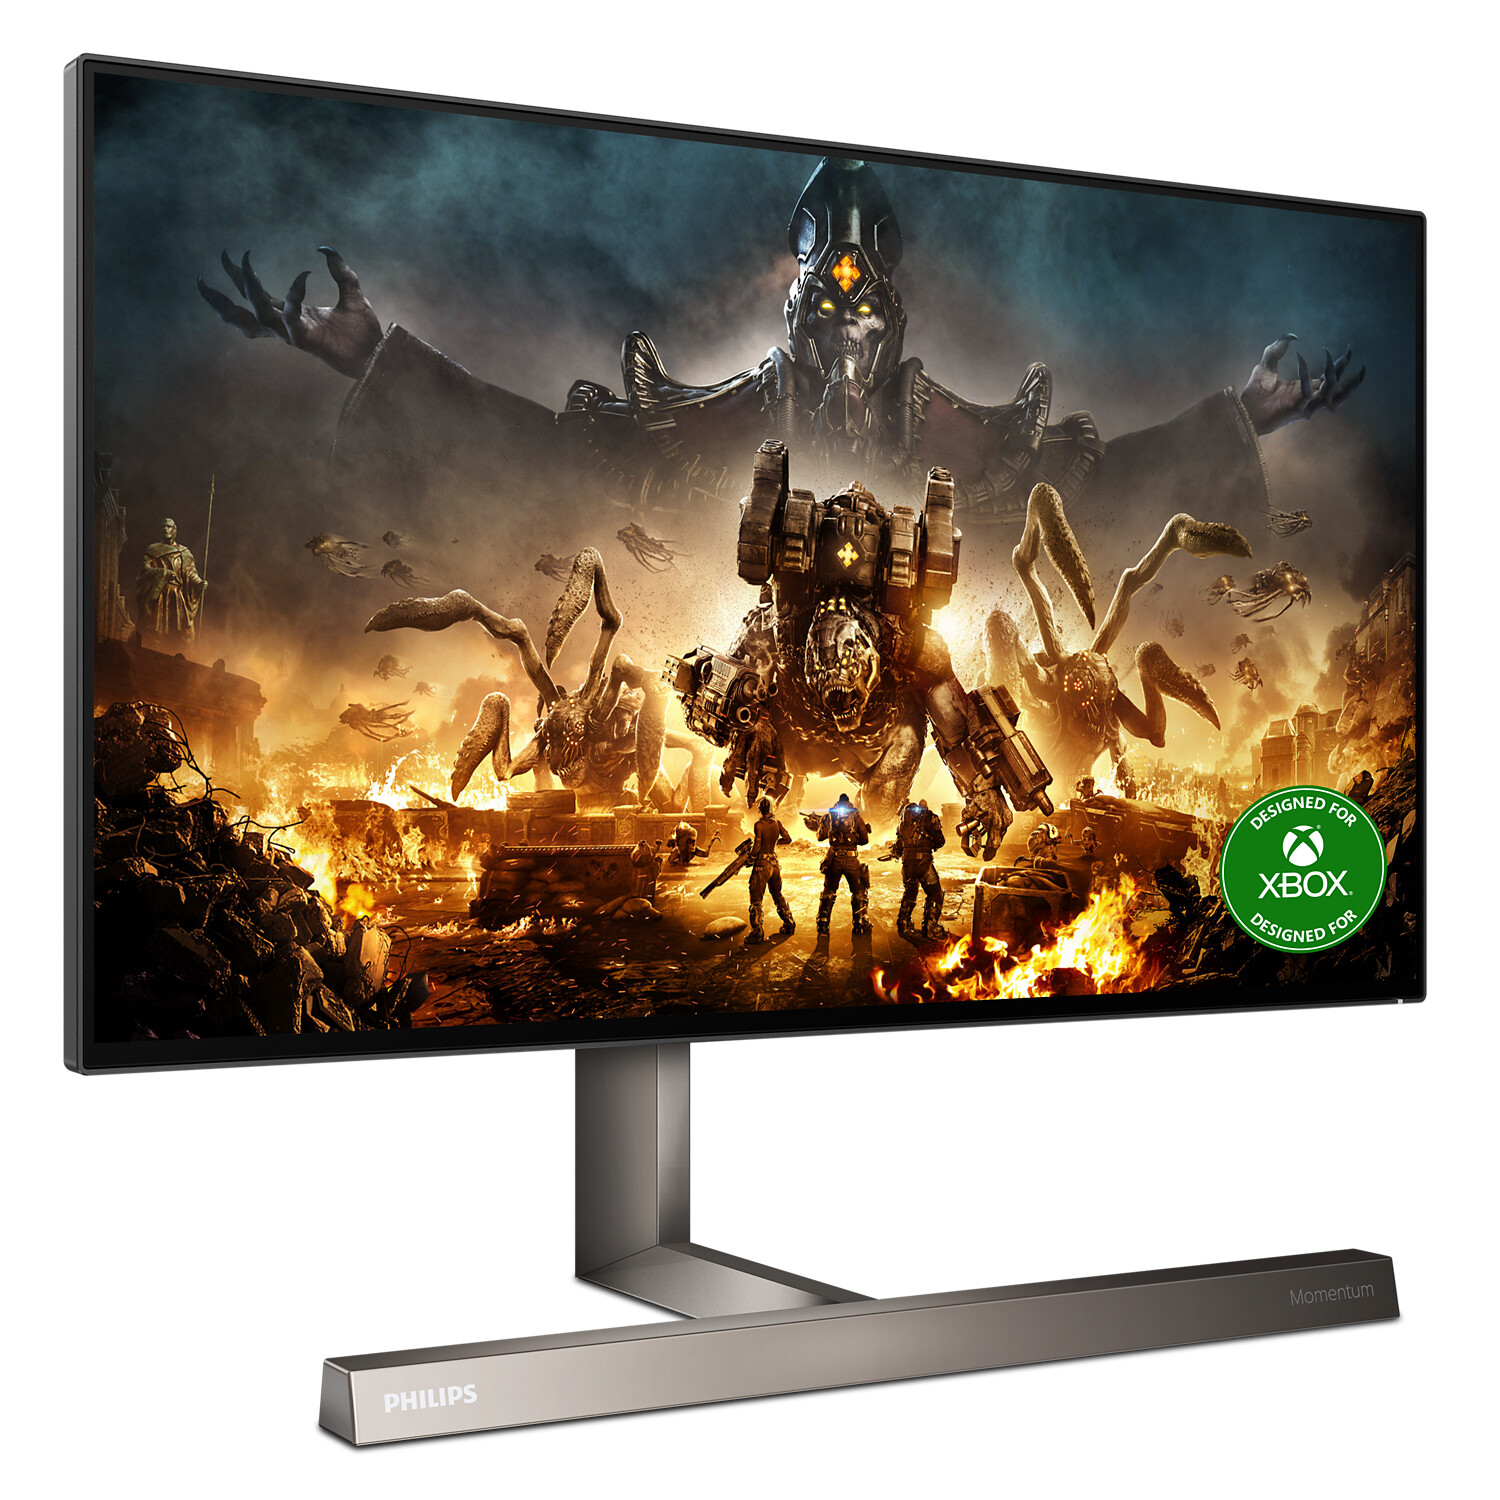 Philips Introduces Ambiglow-Equipped 4K HDR Display for Xbox